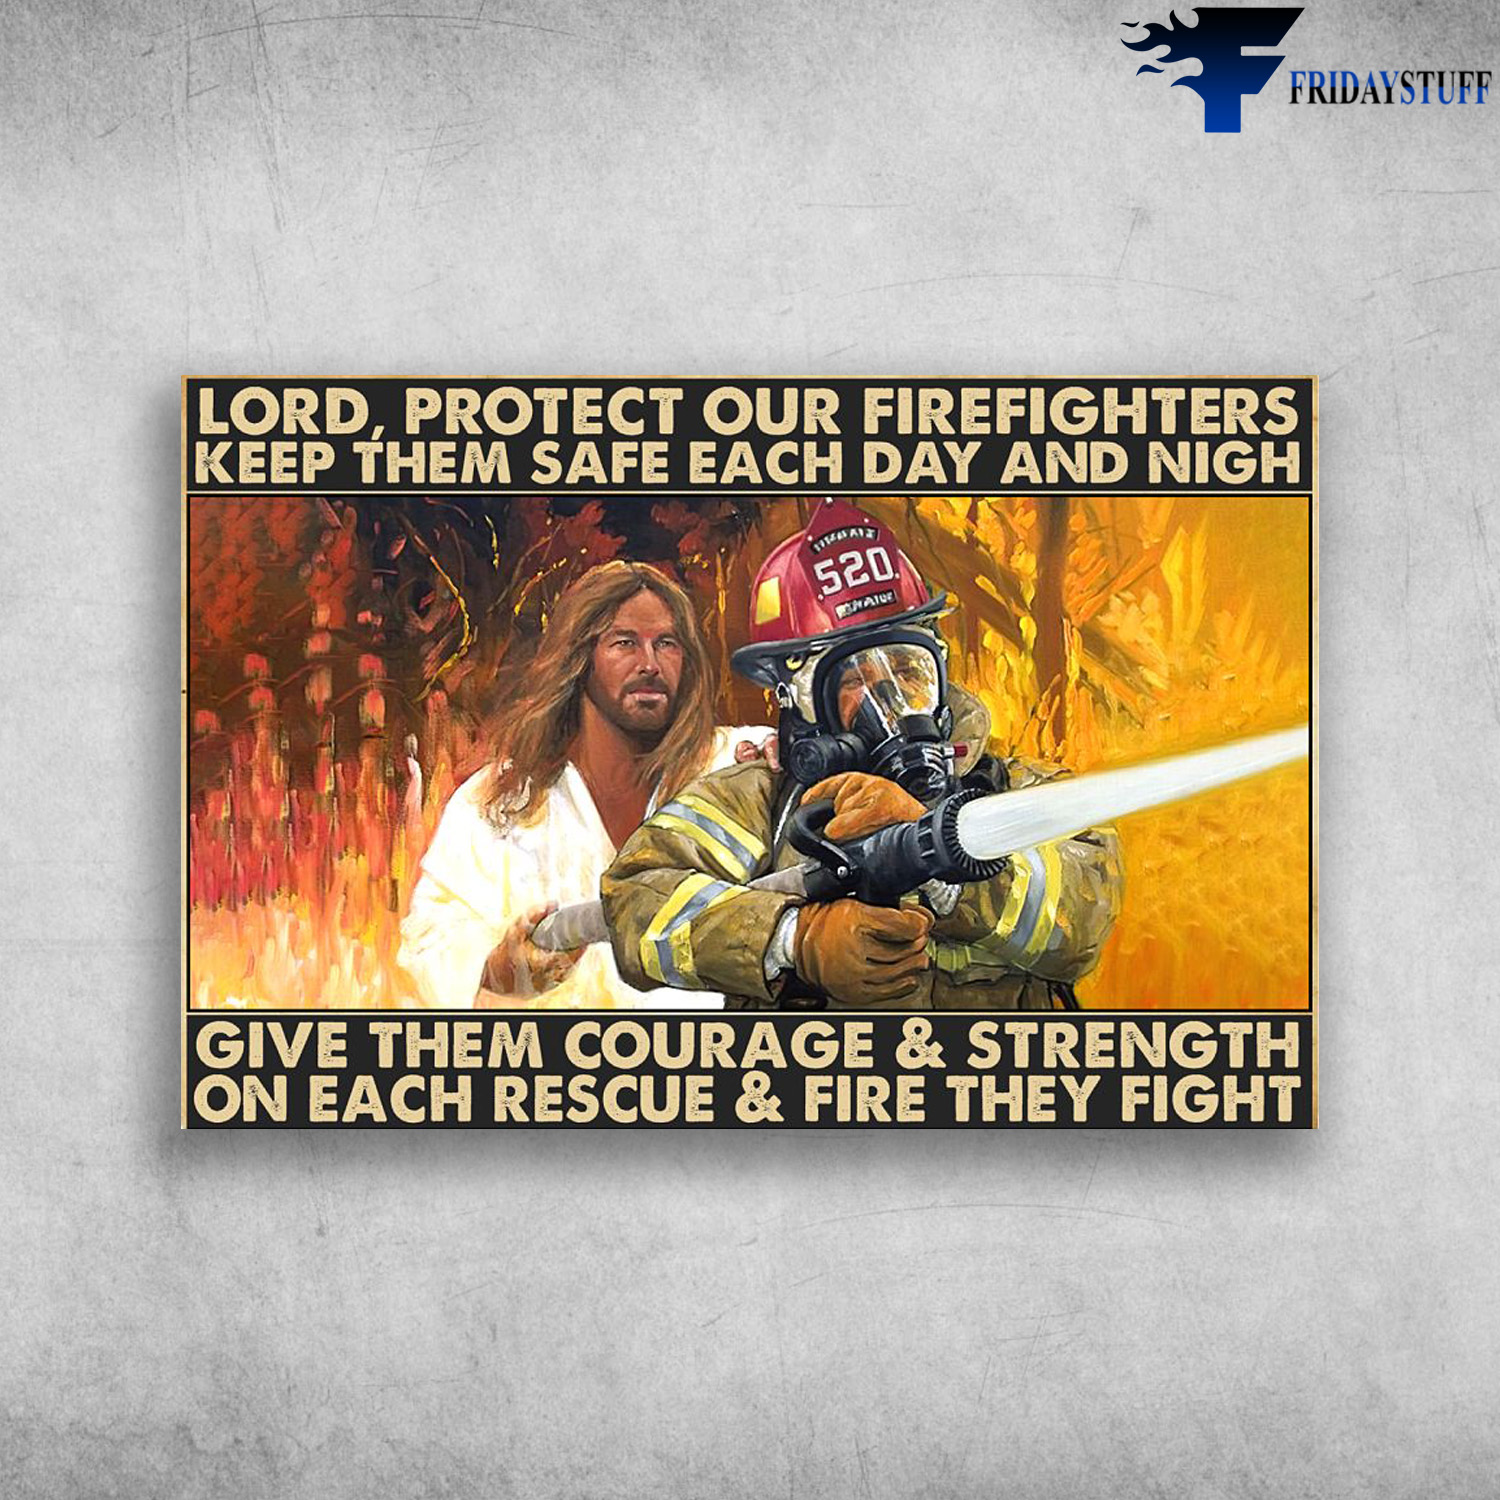 God And Firefighters - Lord, Protect Our Firefighters Keep Them Safe Each Day And Nigh, Give Them Courage And Strength On Each Rescue And Fire They Fight